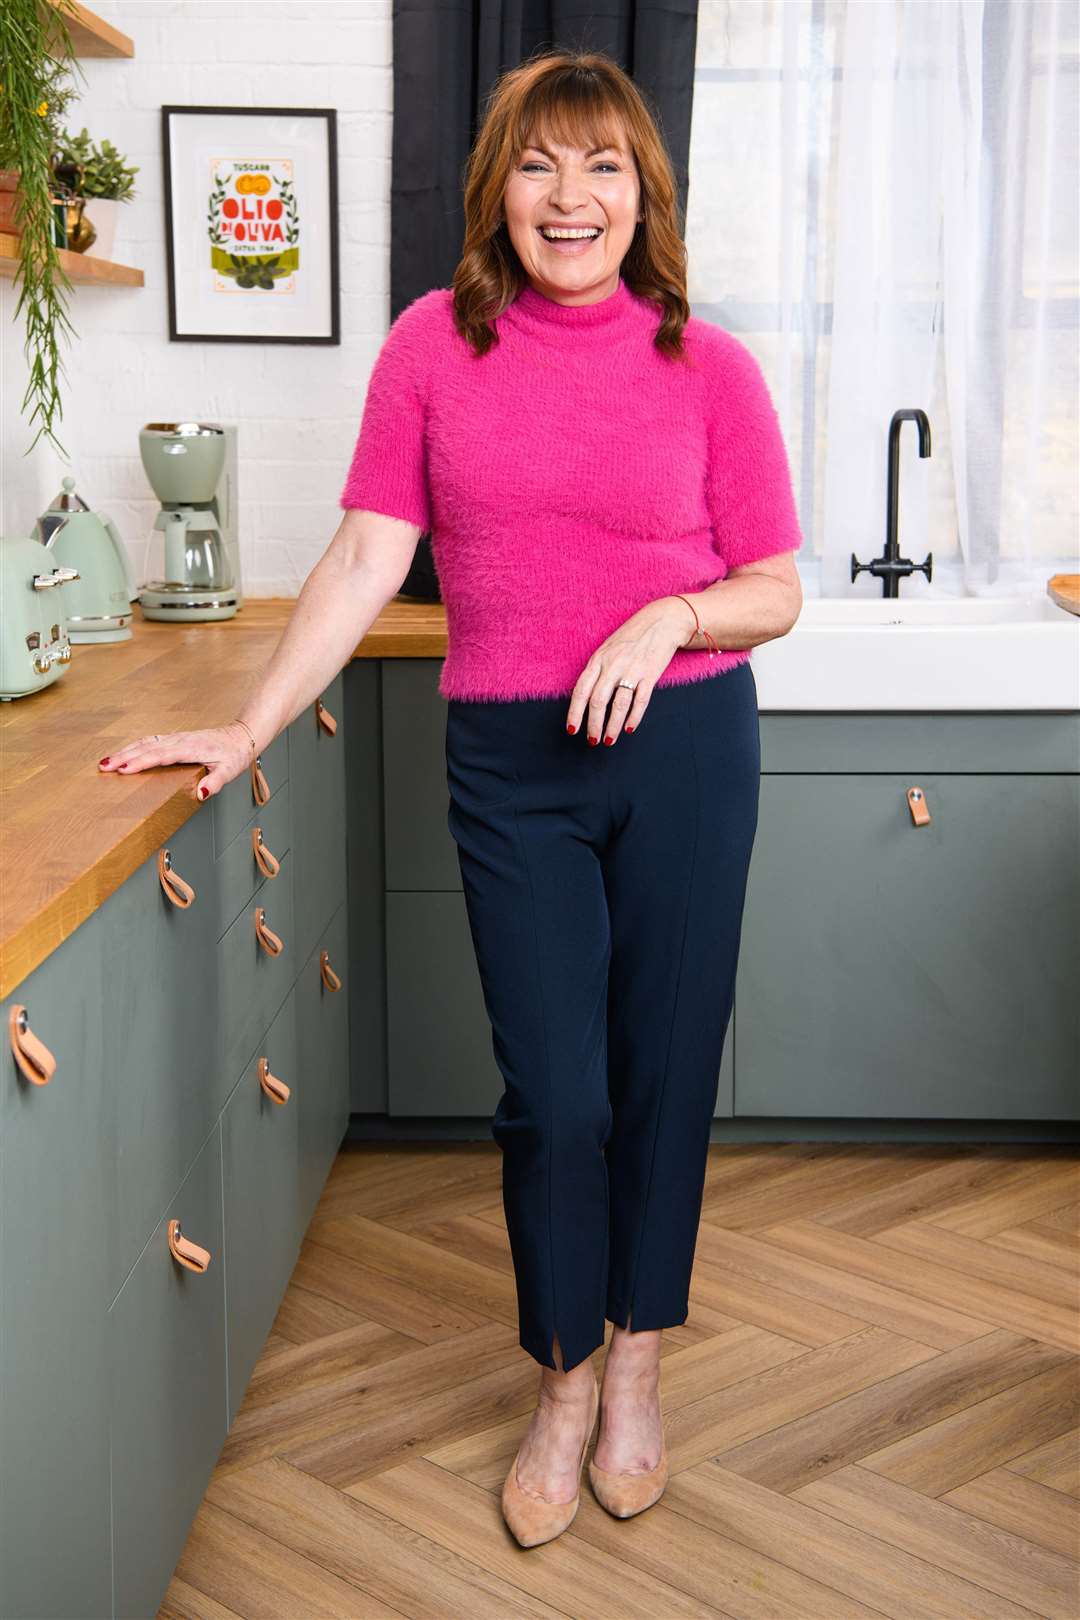 Lorraine Kelly has relaunched the No Butts campaign for 2023 (Matt Crossick/PA)